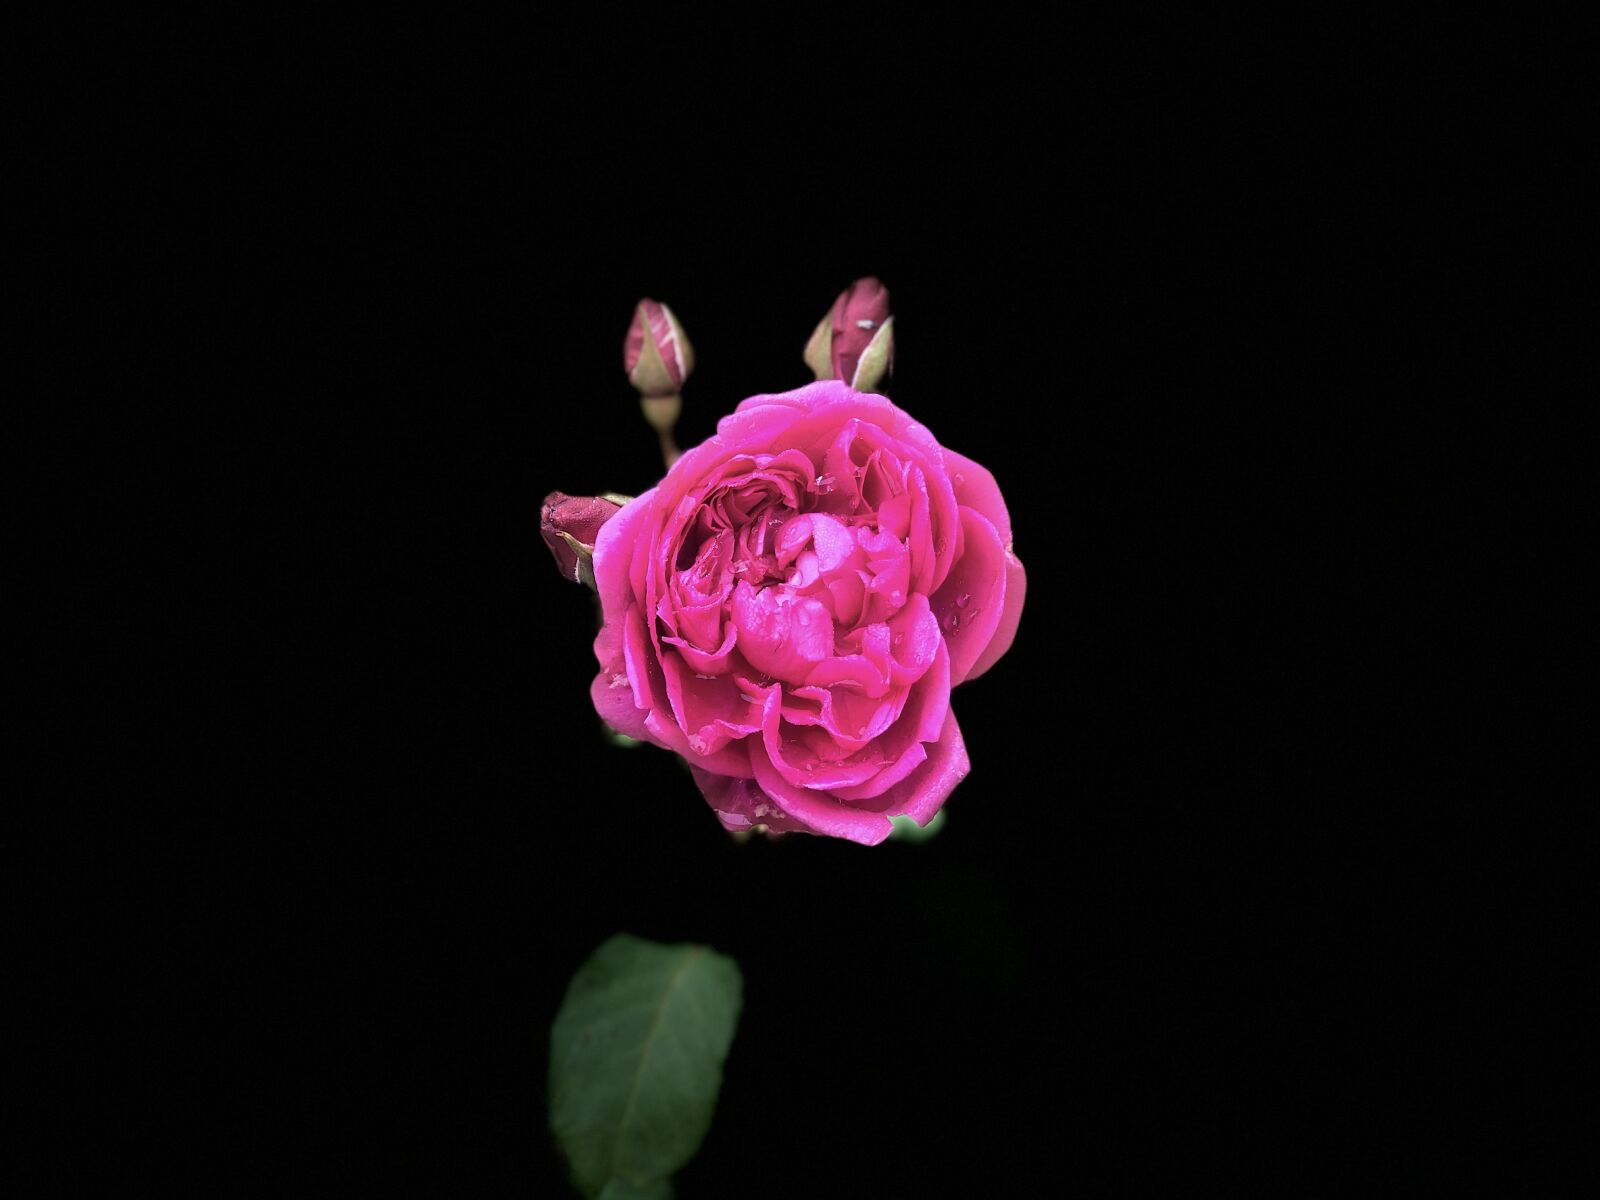 Apple iPhone 8 Plus sample photo. Flower, bloom, nature photography